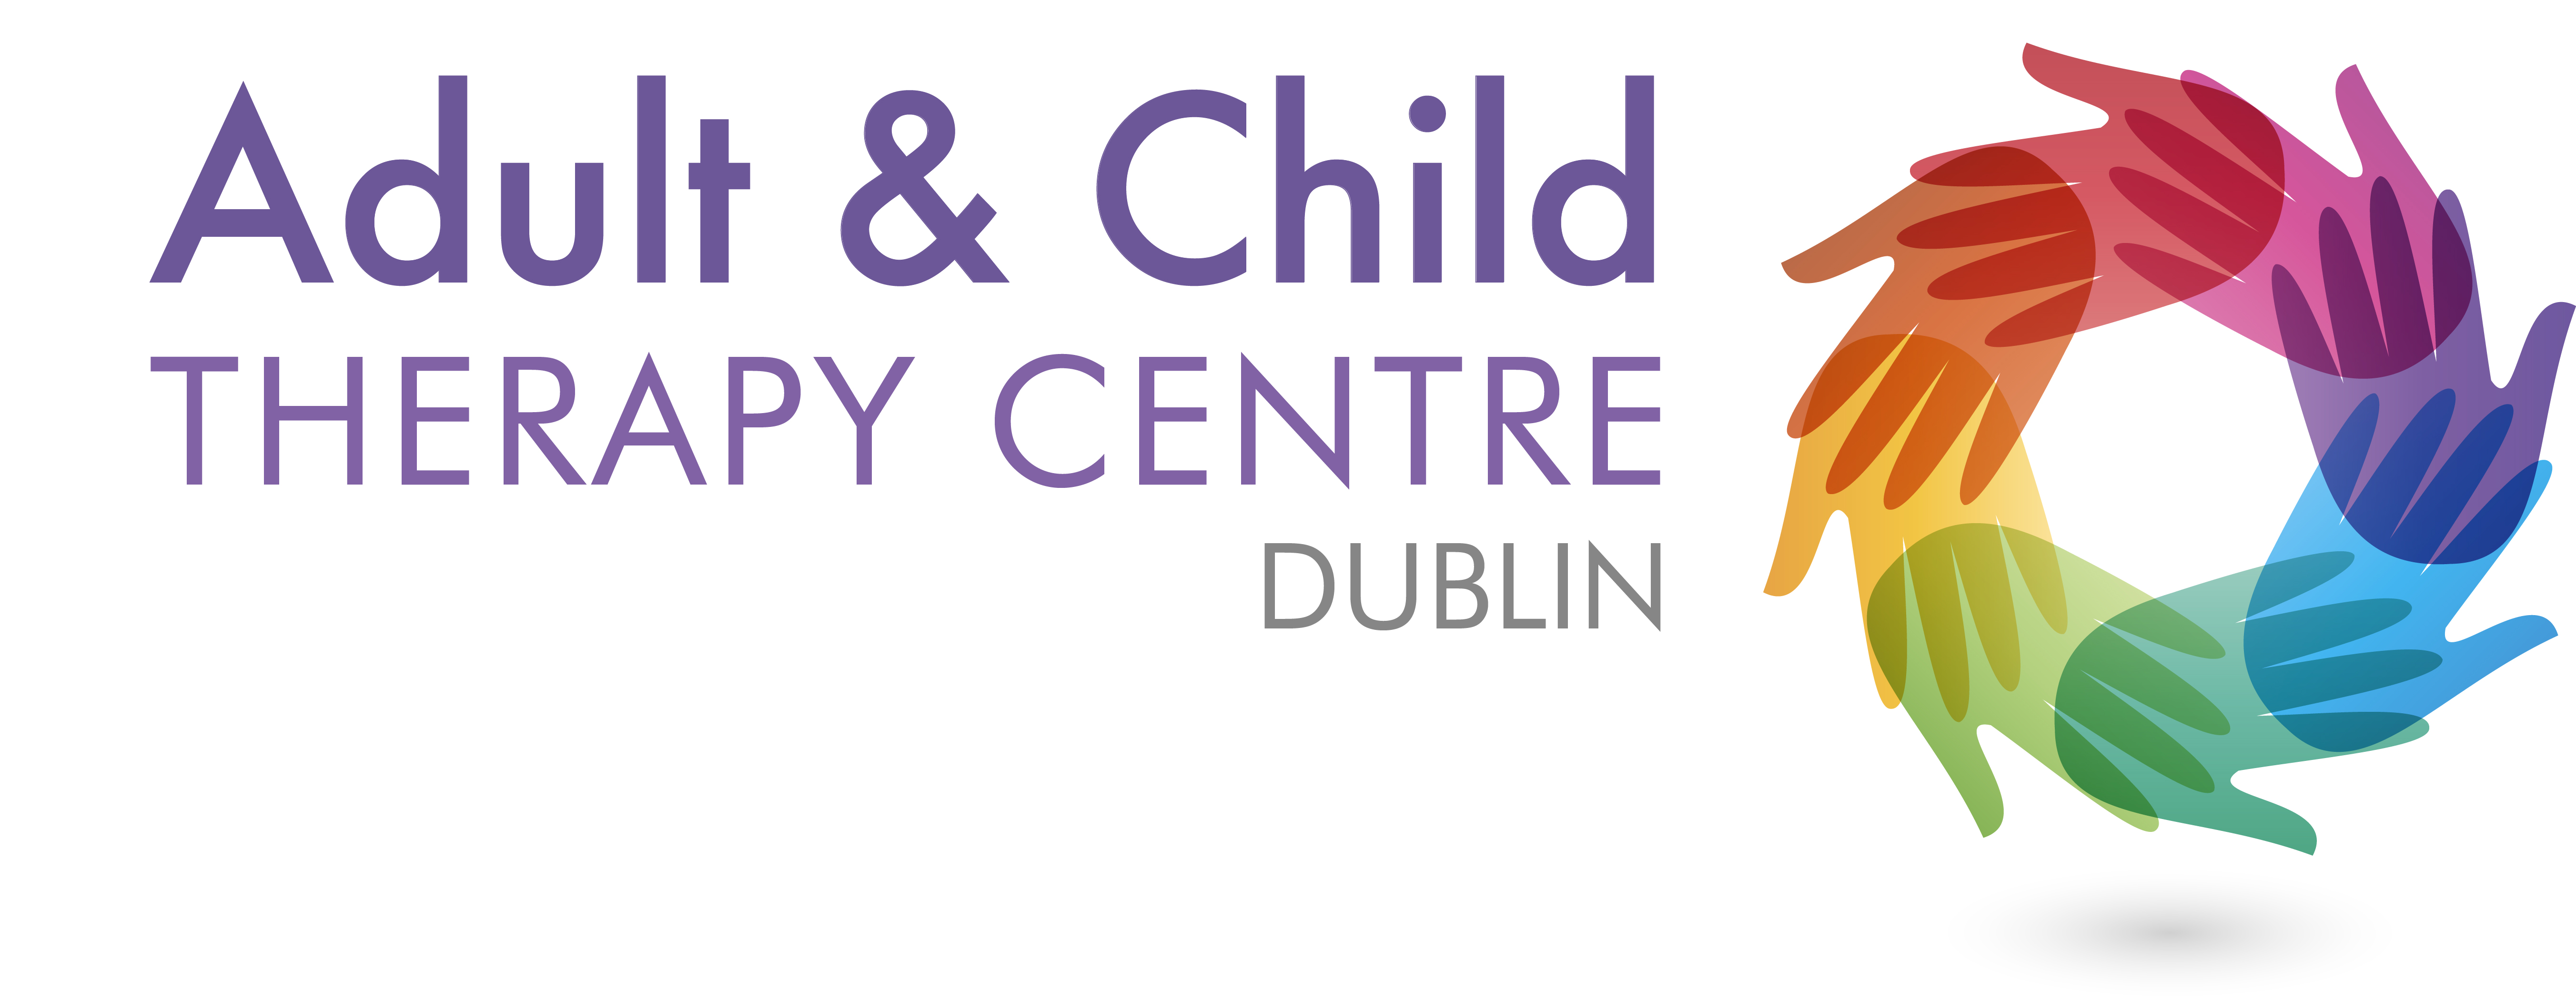 Adult and child therapy centre LOGO FA.jpg logo